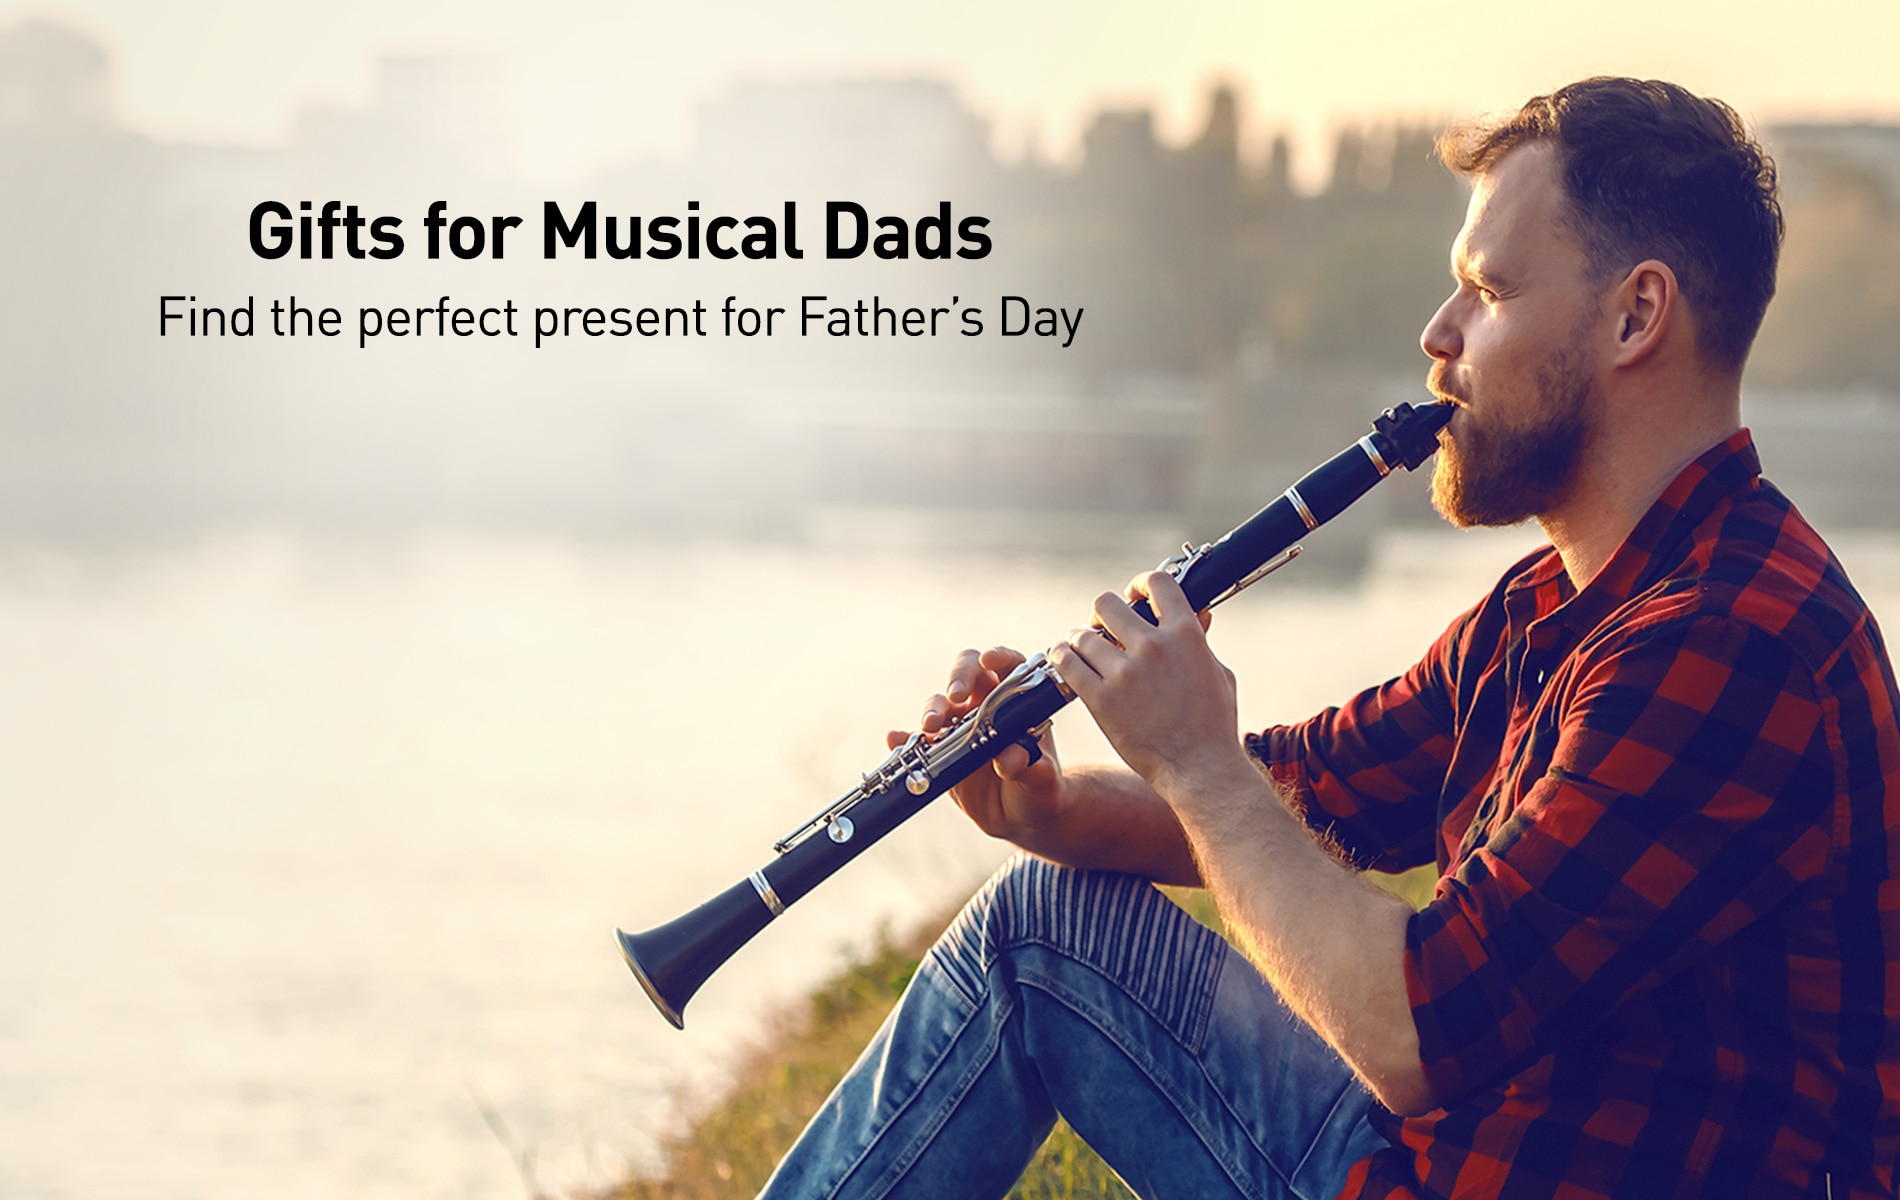 Gifts for the Musical Dad